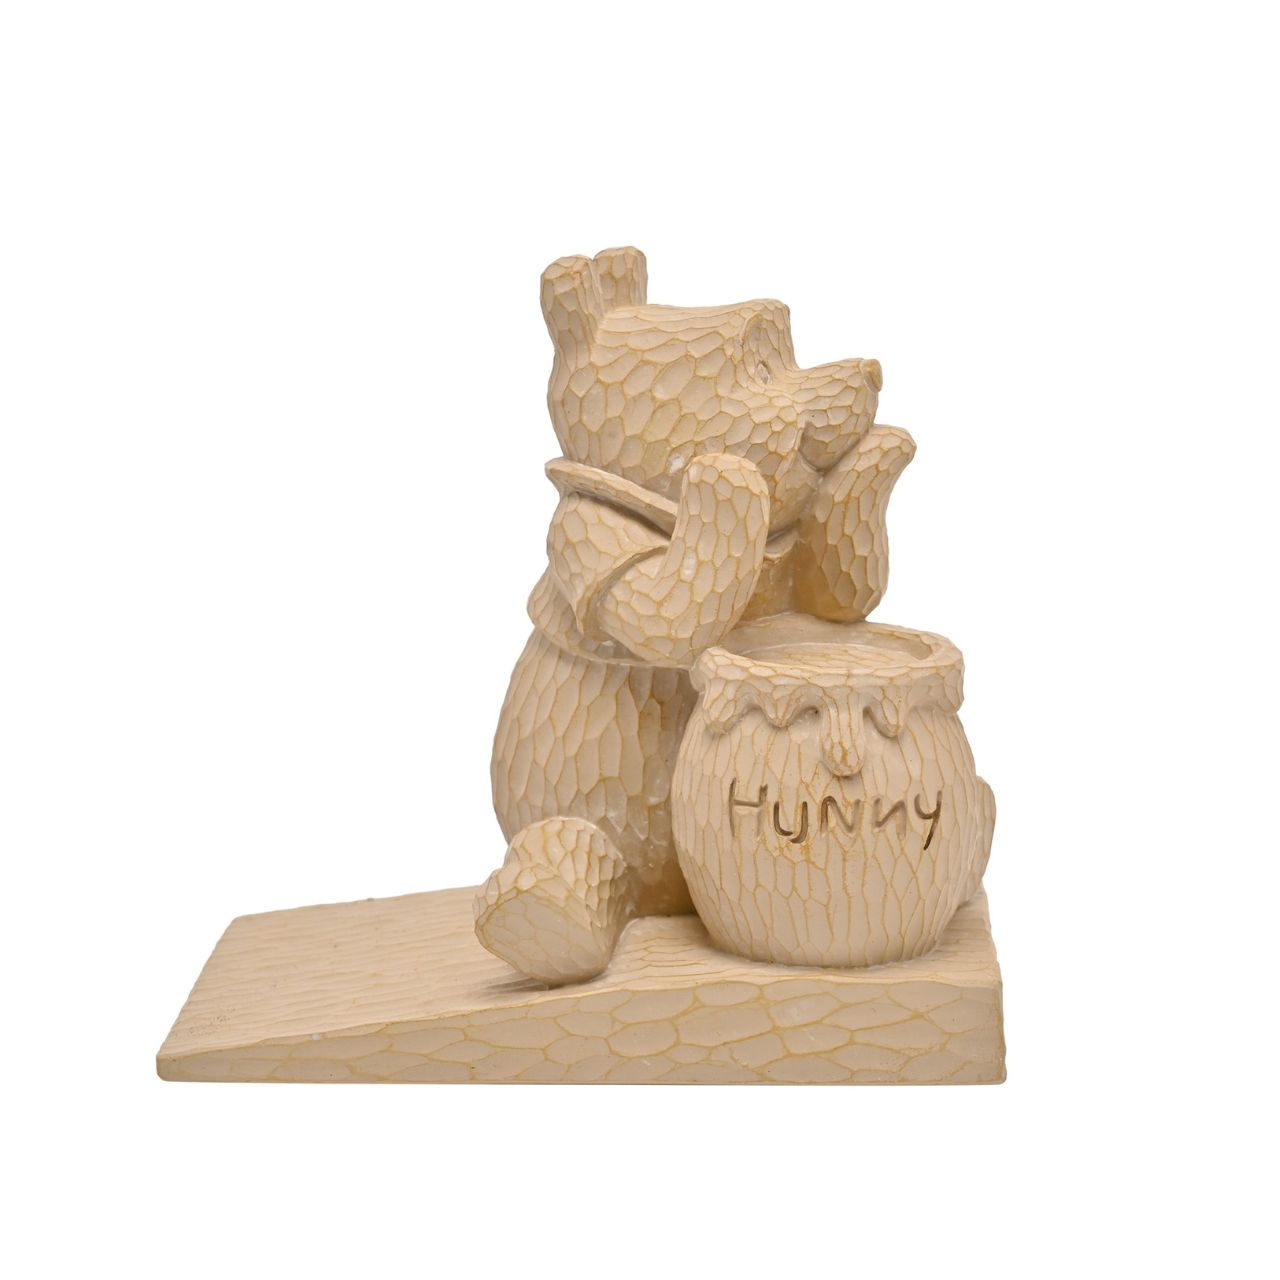 Winnie the Pooh Wood Effect Door Stop  A delightful Winnie-the-Pooh door stop from DISNEY.  Based on the works of A.A.Milne and E.H.Shepard, the charming personality of Winnie is readily on display for all to enjoy.